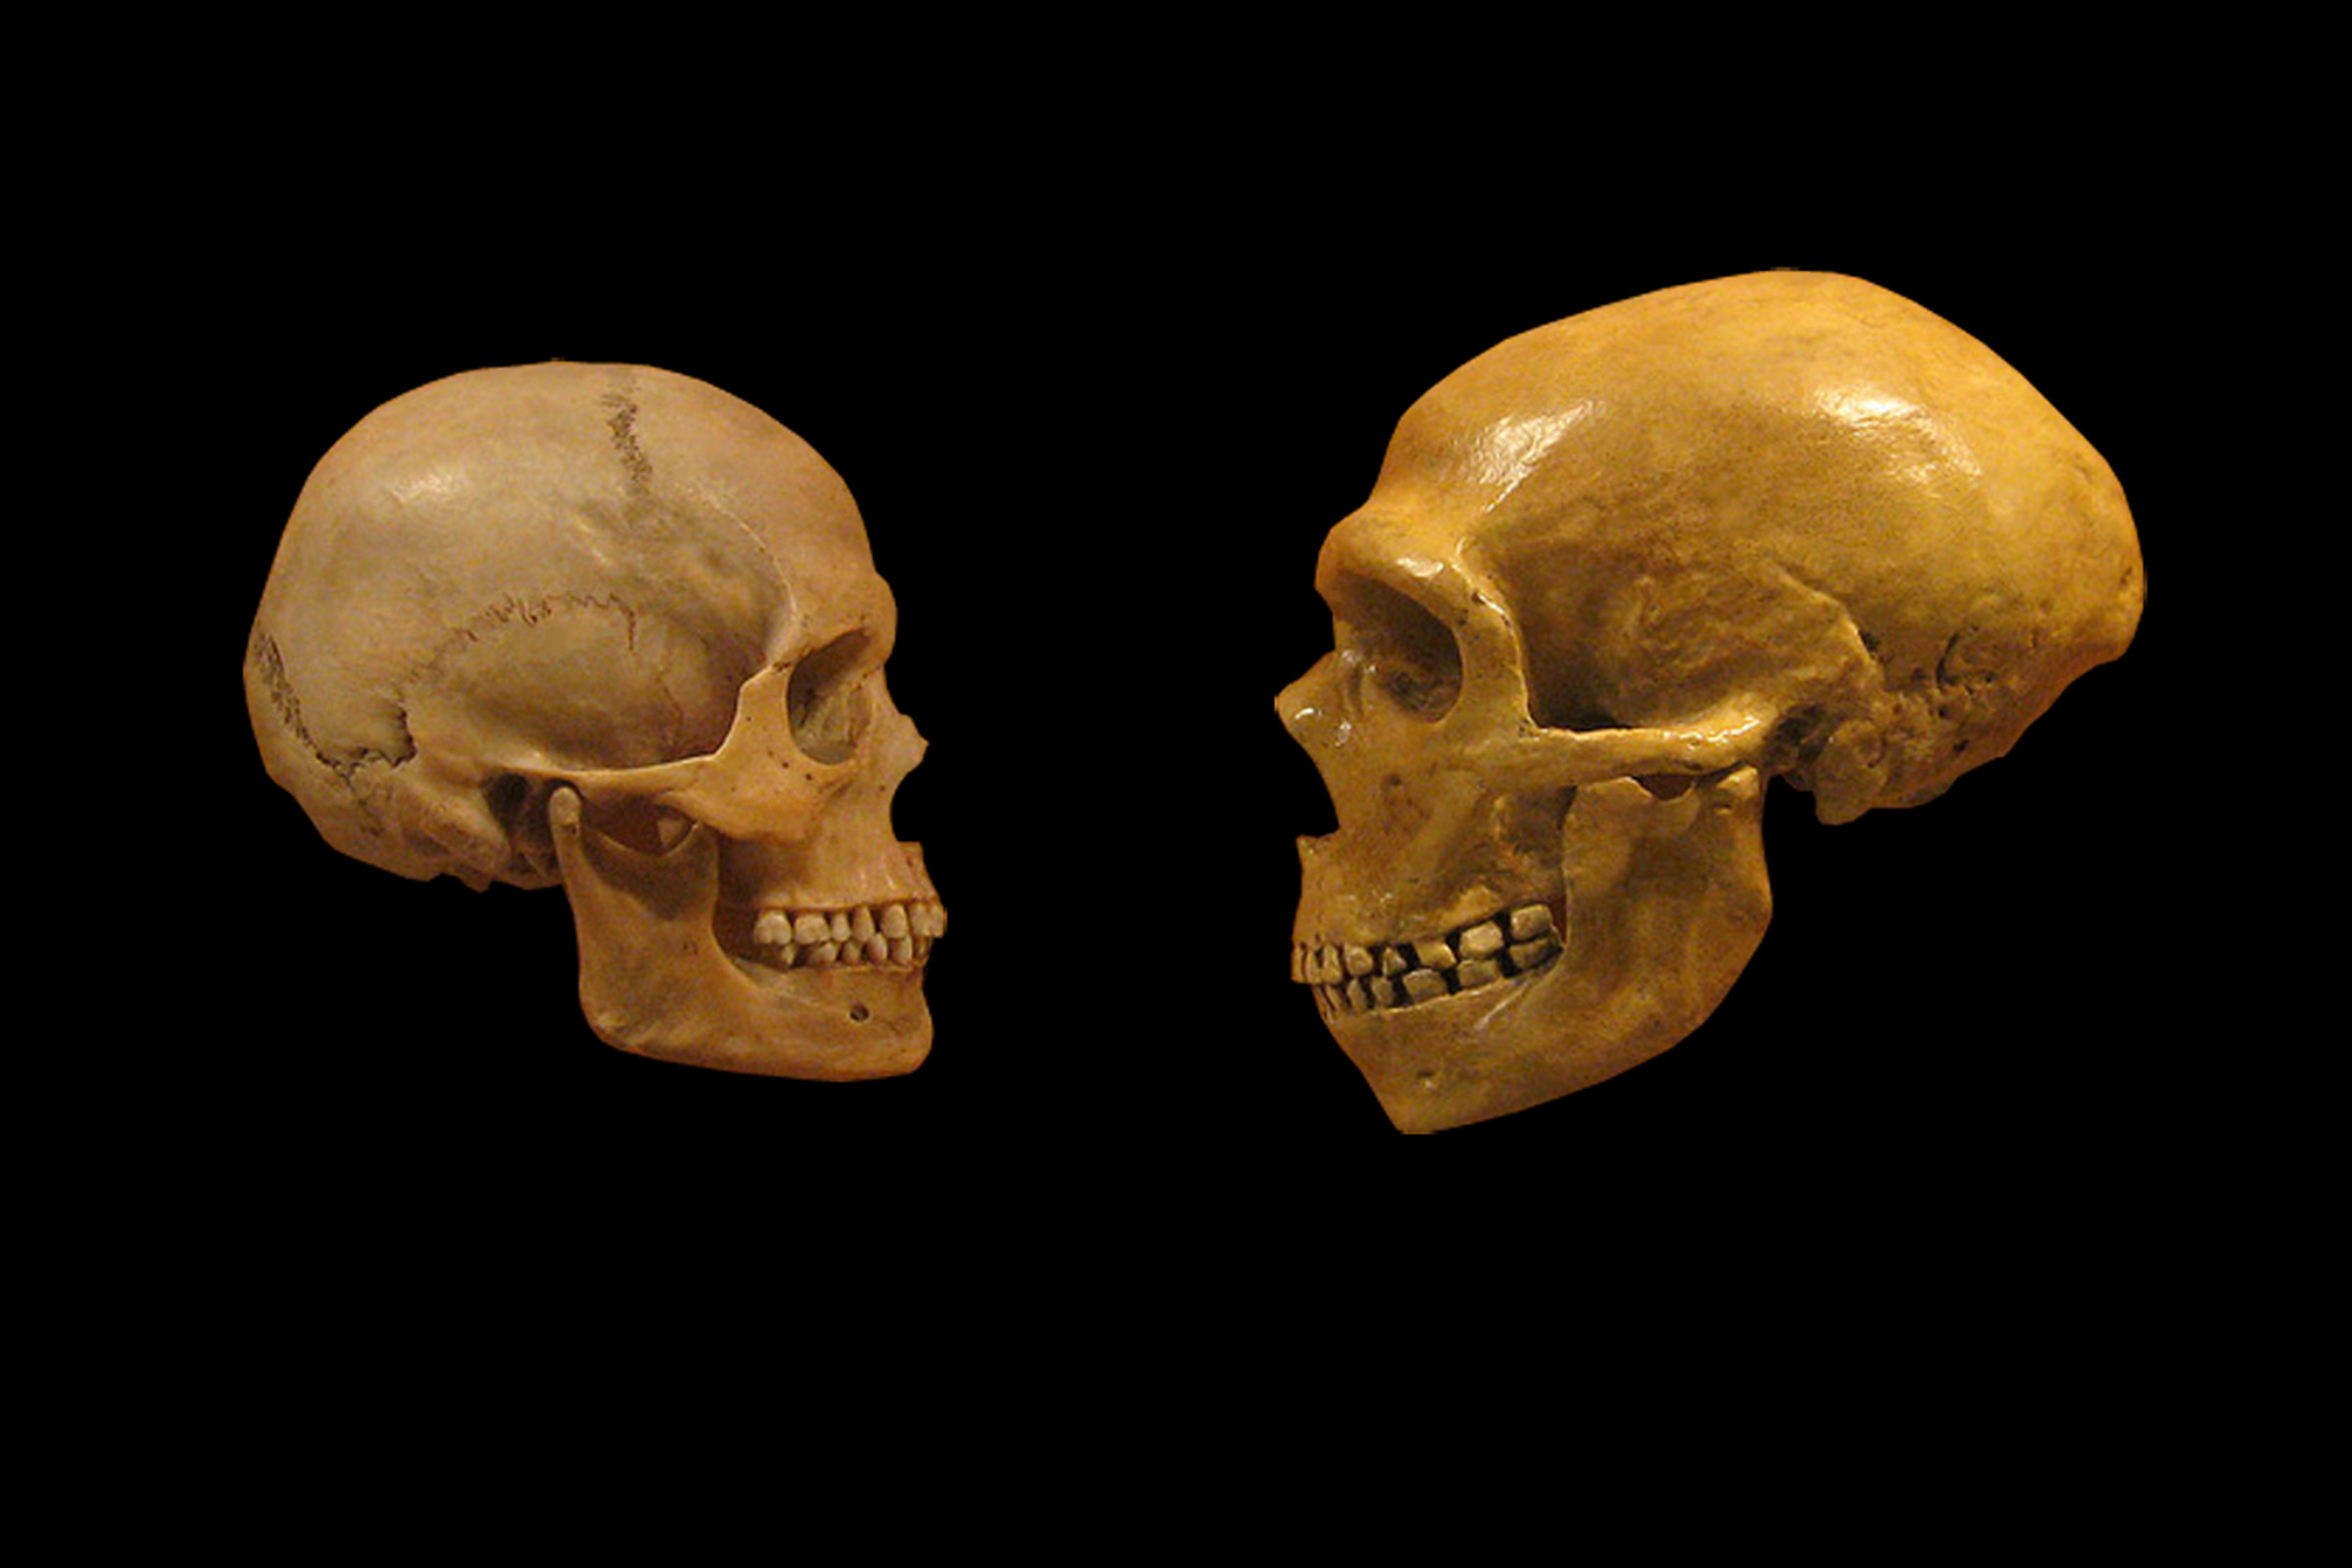 A modern human and a Neanderthal skull facing each other. Photo by hairymuseummat (from the Cleveland Museum of Natural History) modified by DrMikeBaxter/Wikimedia Commons